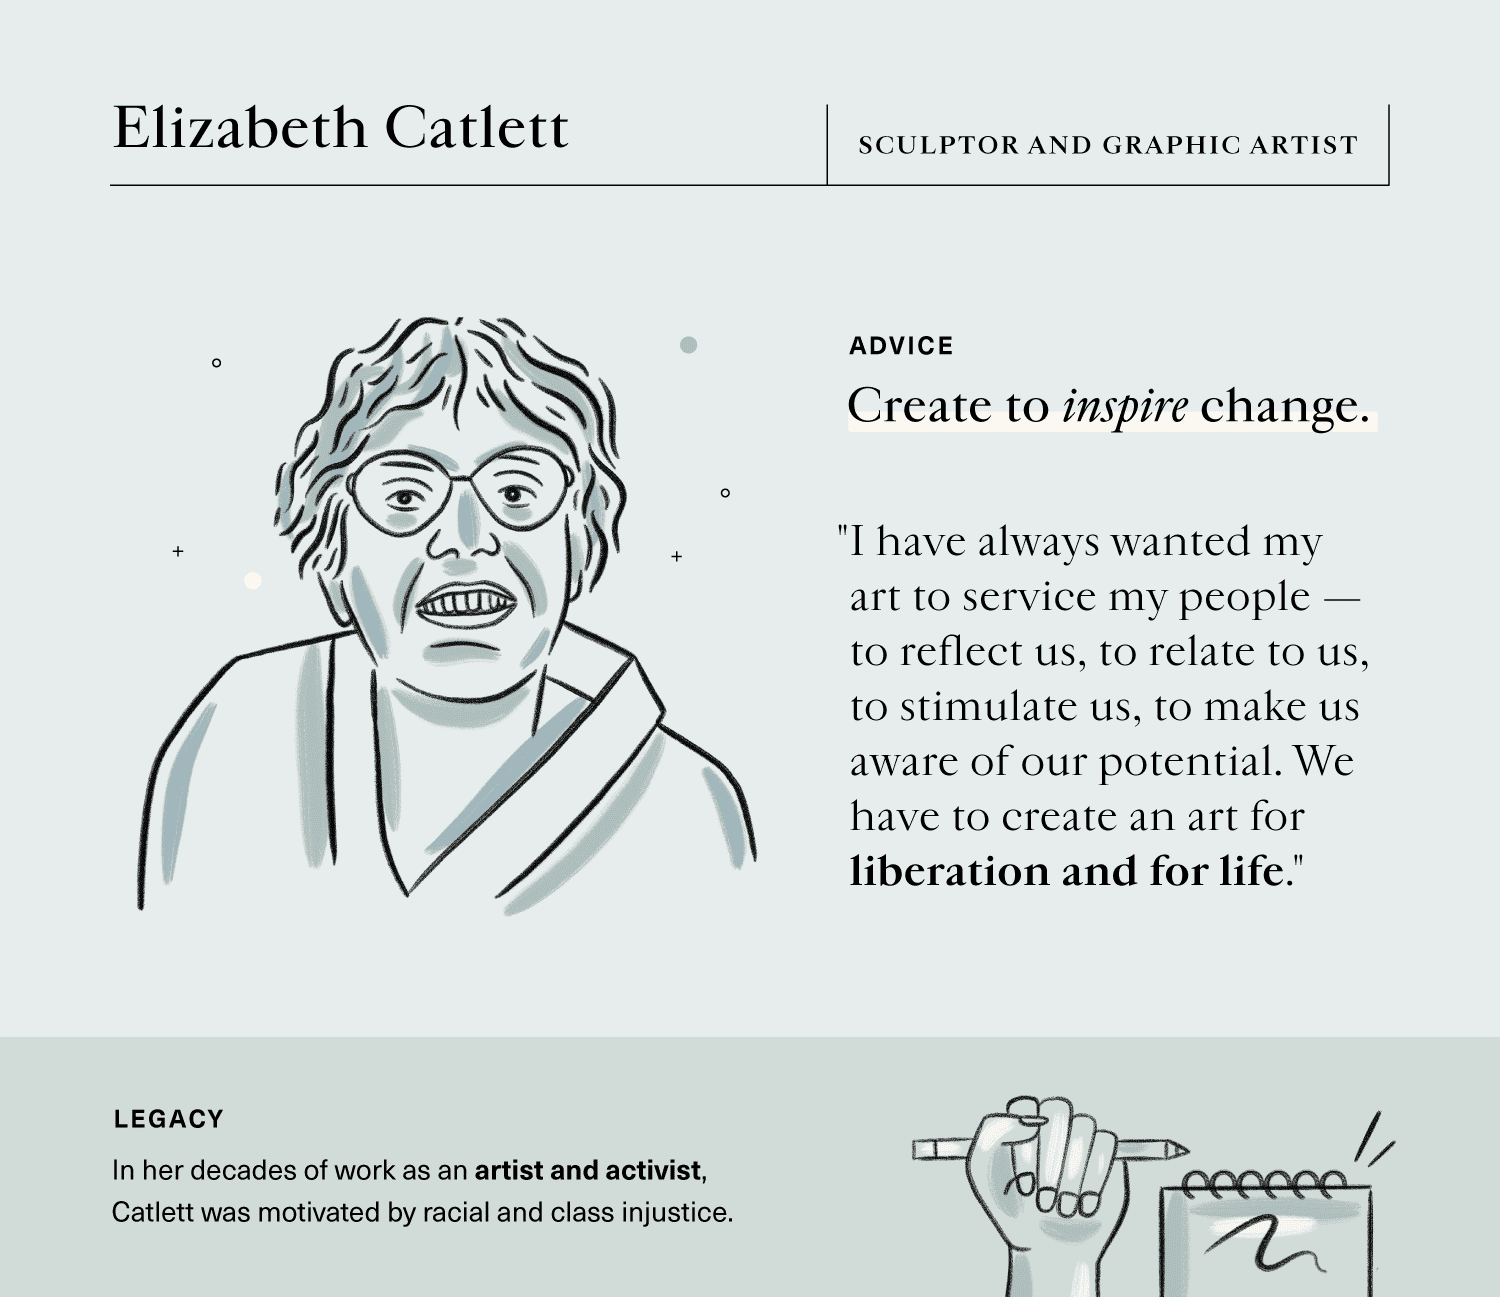 advice on self-expression from sculptor and graphic artist, Elizabeth Catlett.